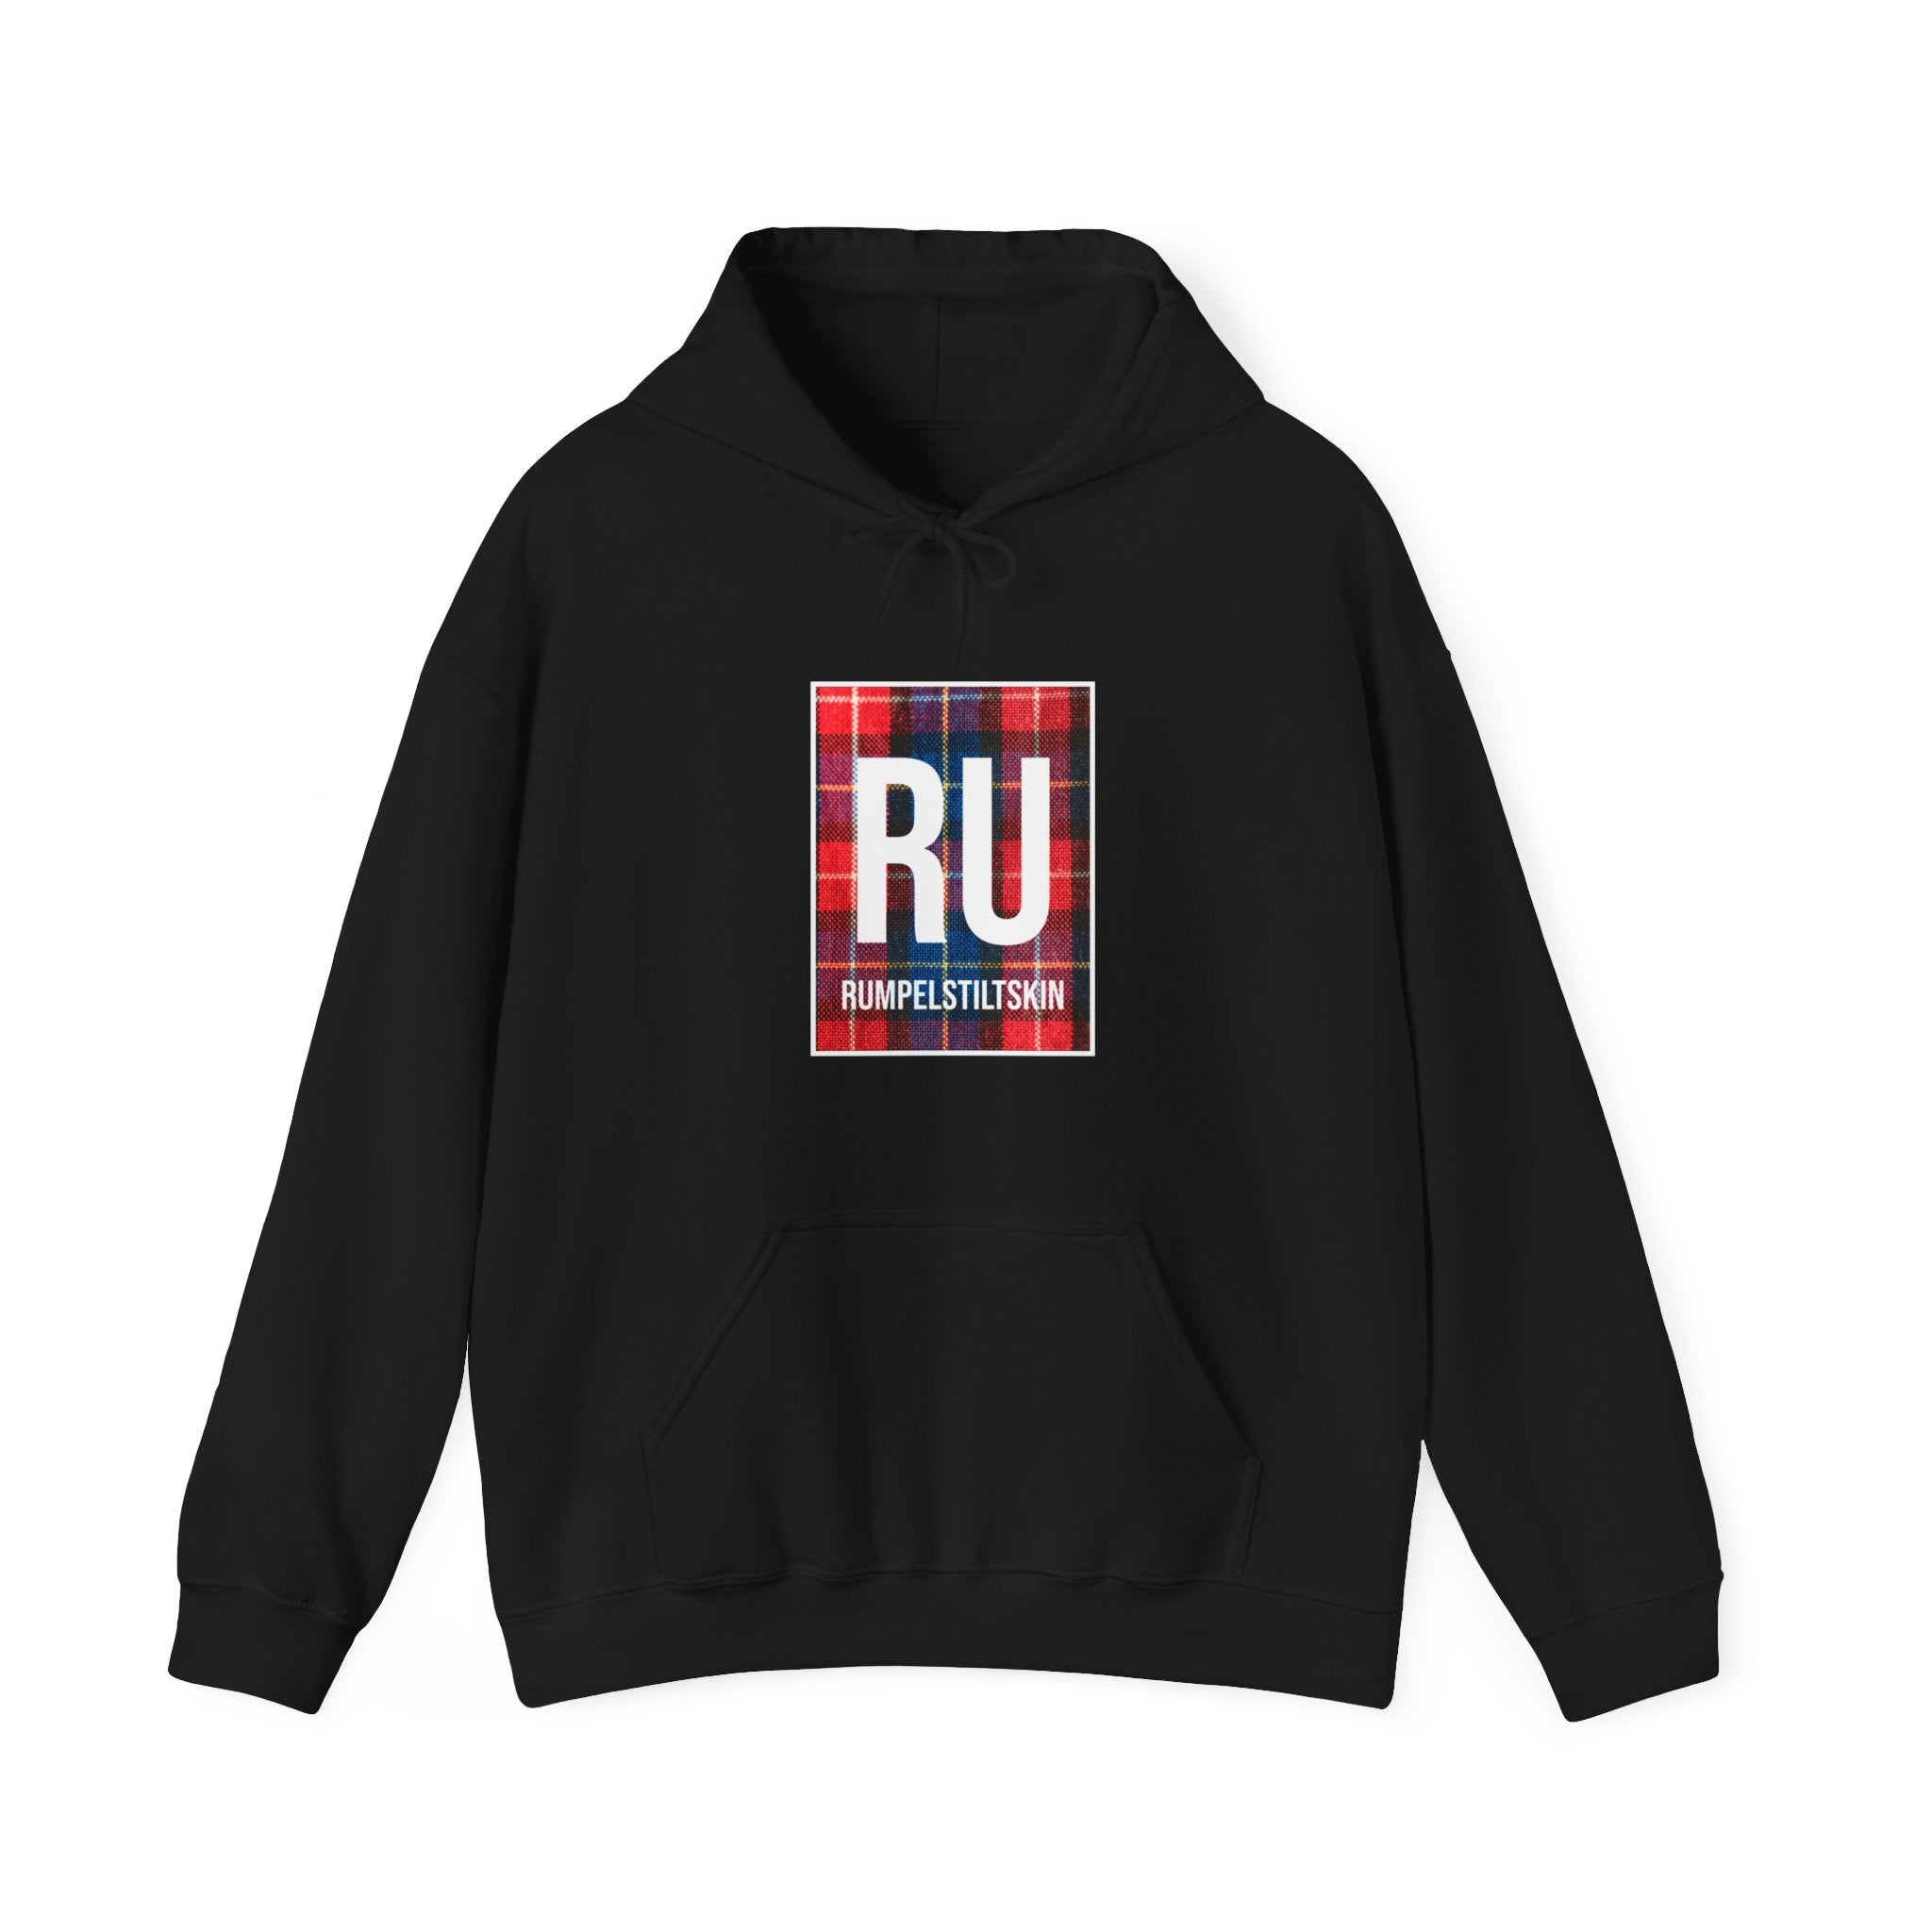 A black hooded sweatshirt featuring a plaid-patterned rectangular graphic with "RU" in large white letters and "Rumpelstiltskin" written below, offering the ultimate comfort and style. Introducing the **RU - Hooded Sweatshirt**.